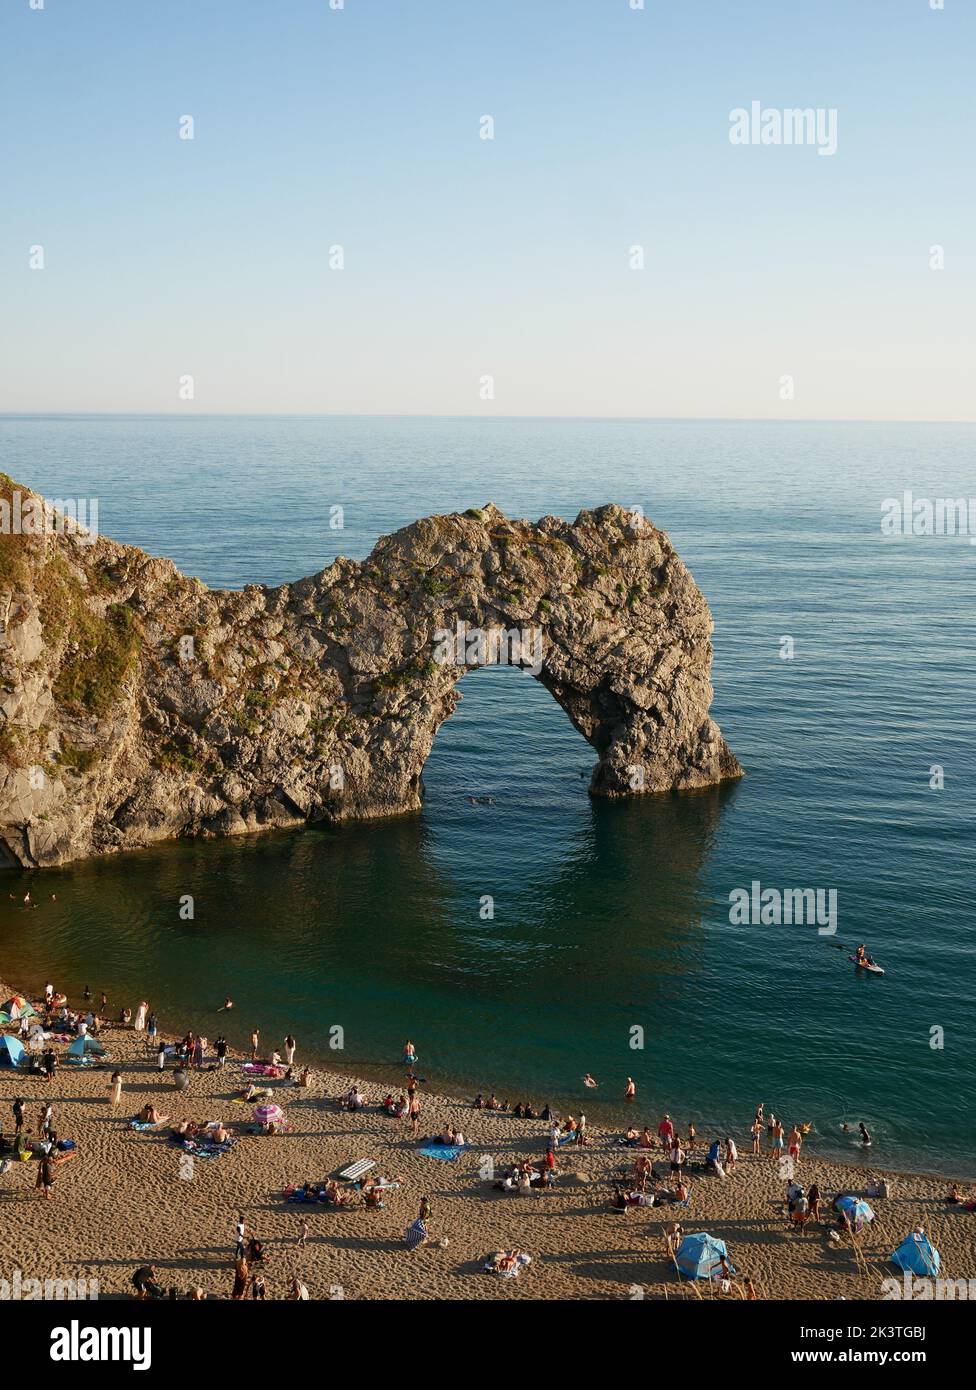 Durdle Door is a natural limestone arch on the Jurassic Coast near Lulworth in Dorset, England. Stock Photo